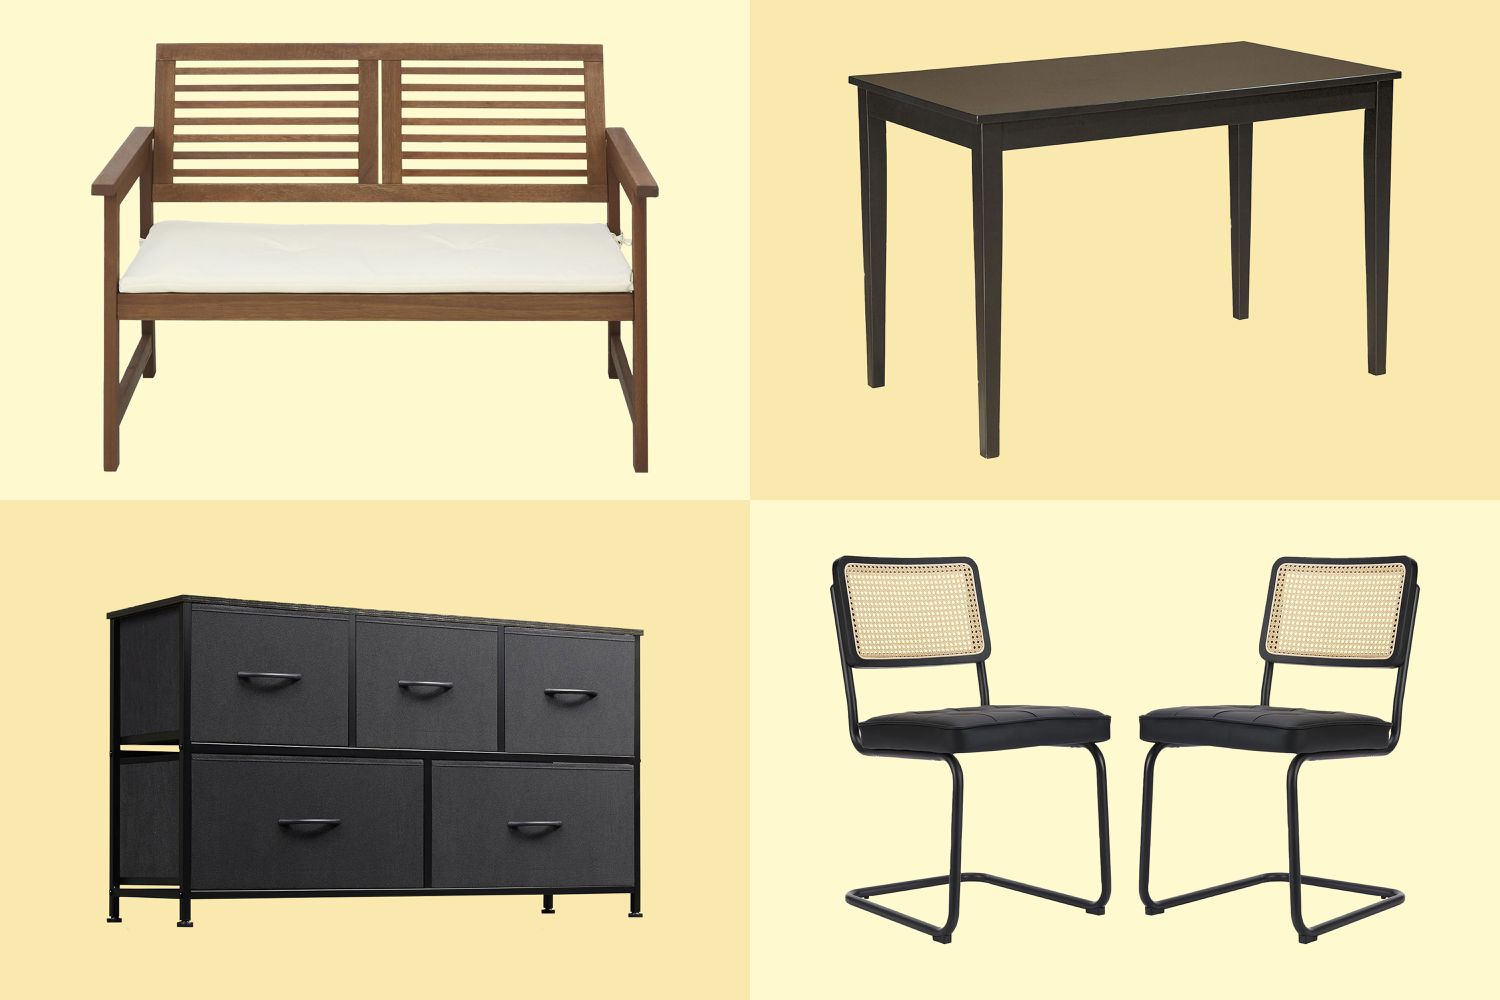 Early Amazon Prime Day Furniture Deals